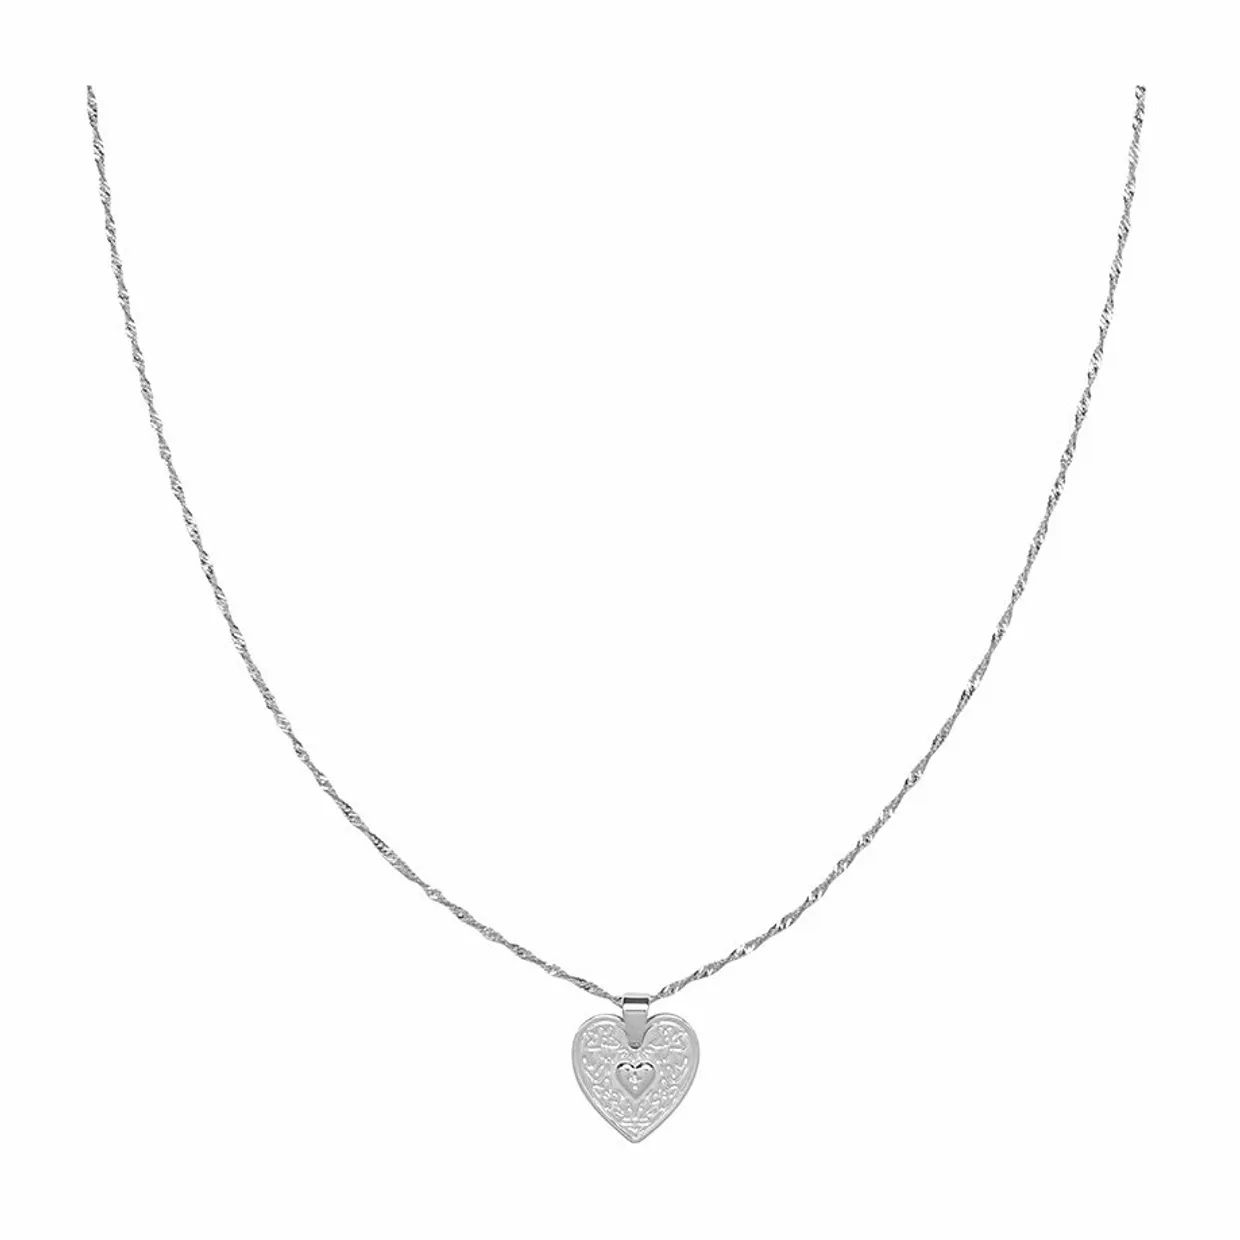 Necklace love me silver